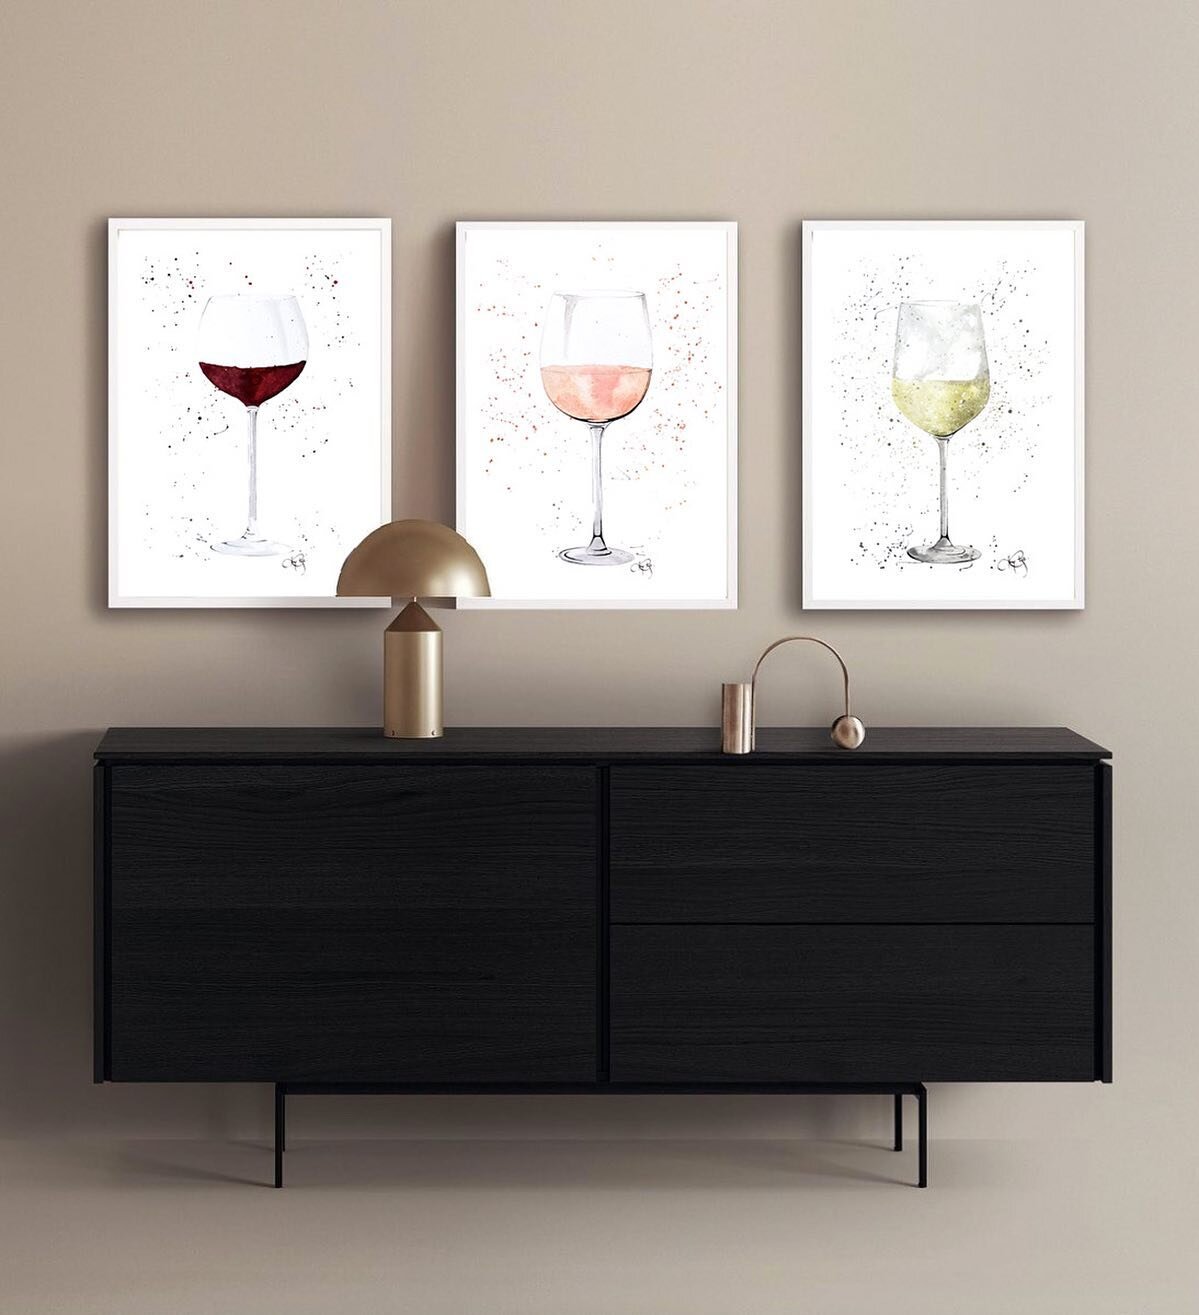 Wine, anyone? 
Red, Rose, and White wine glasses from The Cocktail Club Collection available to purchase now at amyelisestudio.co.uk ✨

#Wallart #wallartdecor #interiorstyling #interiordesign #interiordecor #fashionart #fashionillustration #artist #p